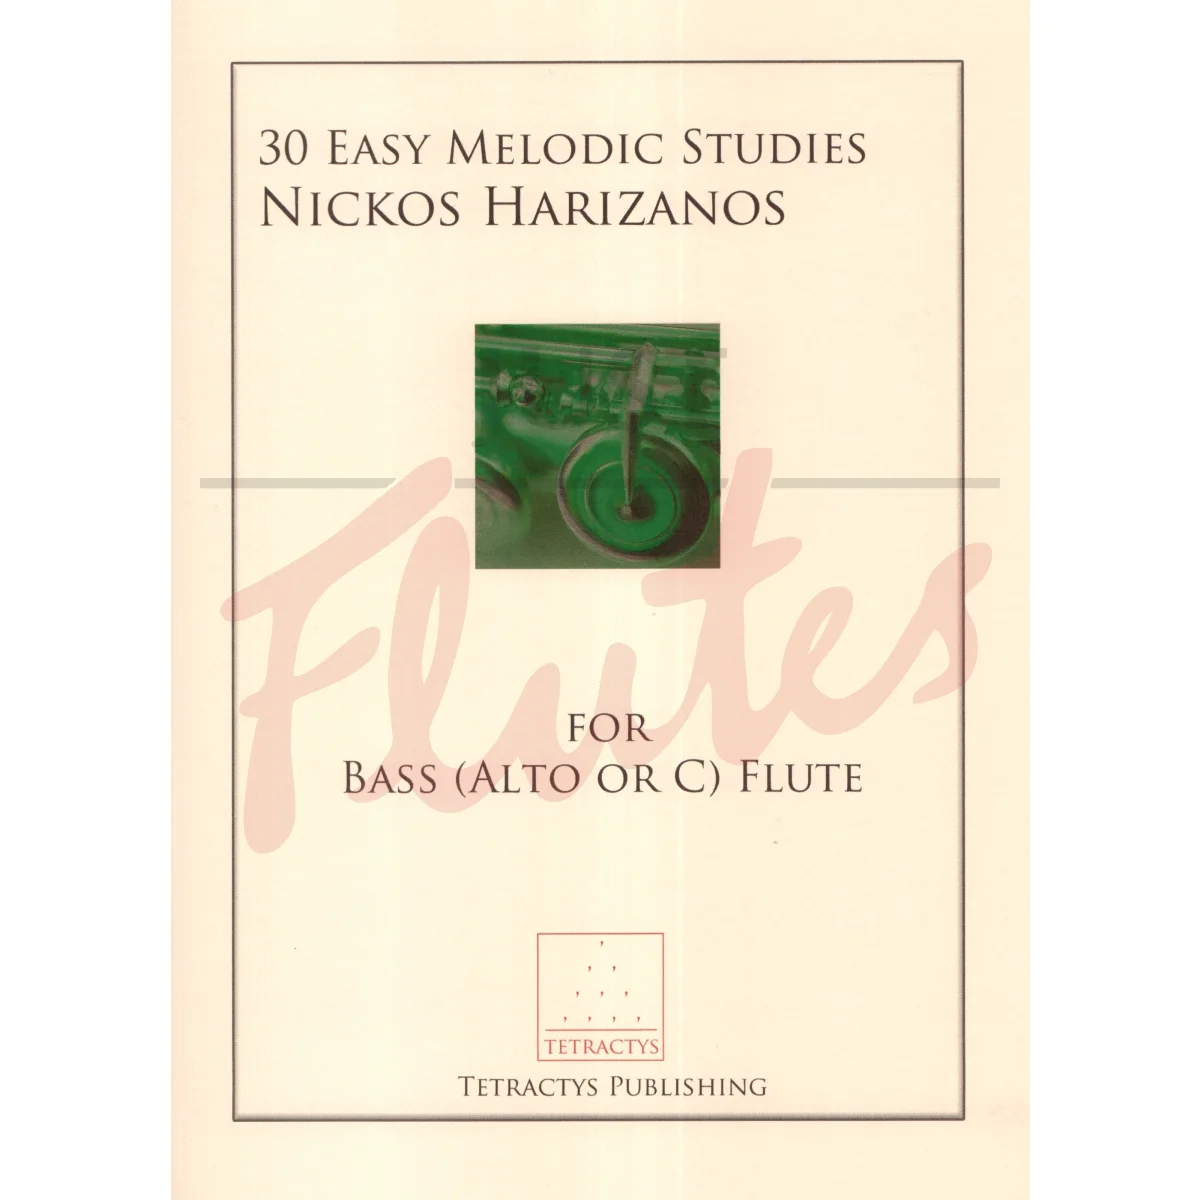 30 Easy Melodic Studies for Bass Flute